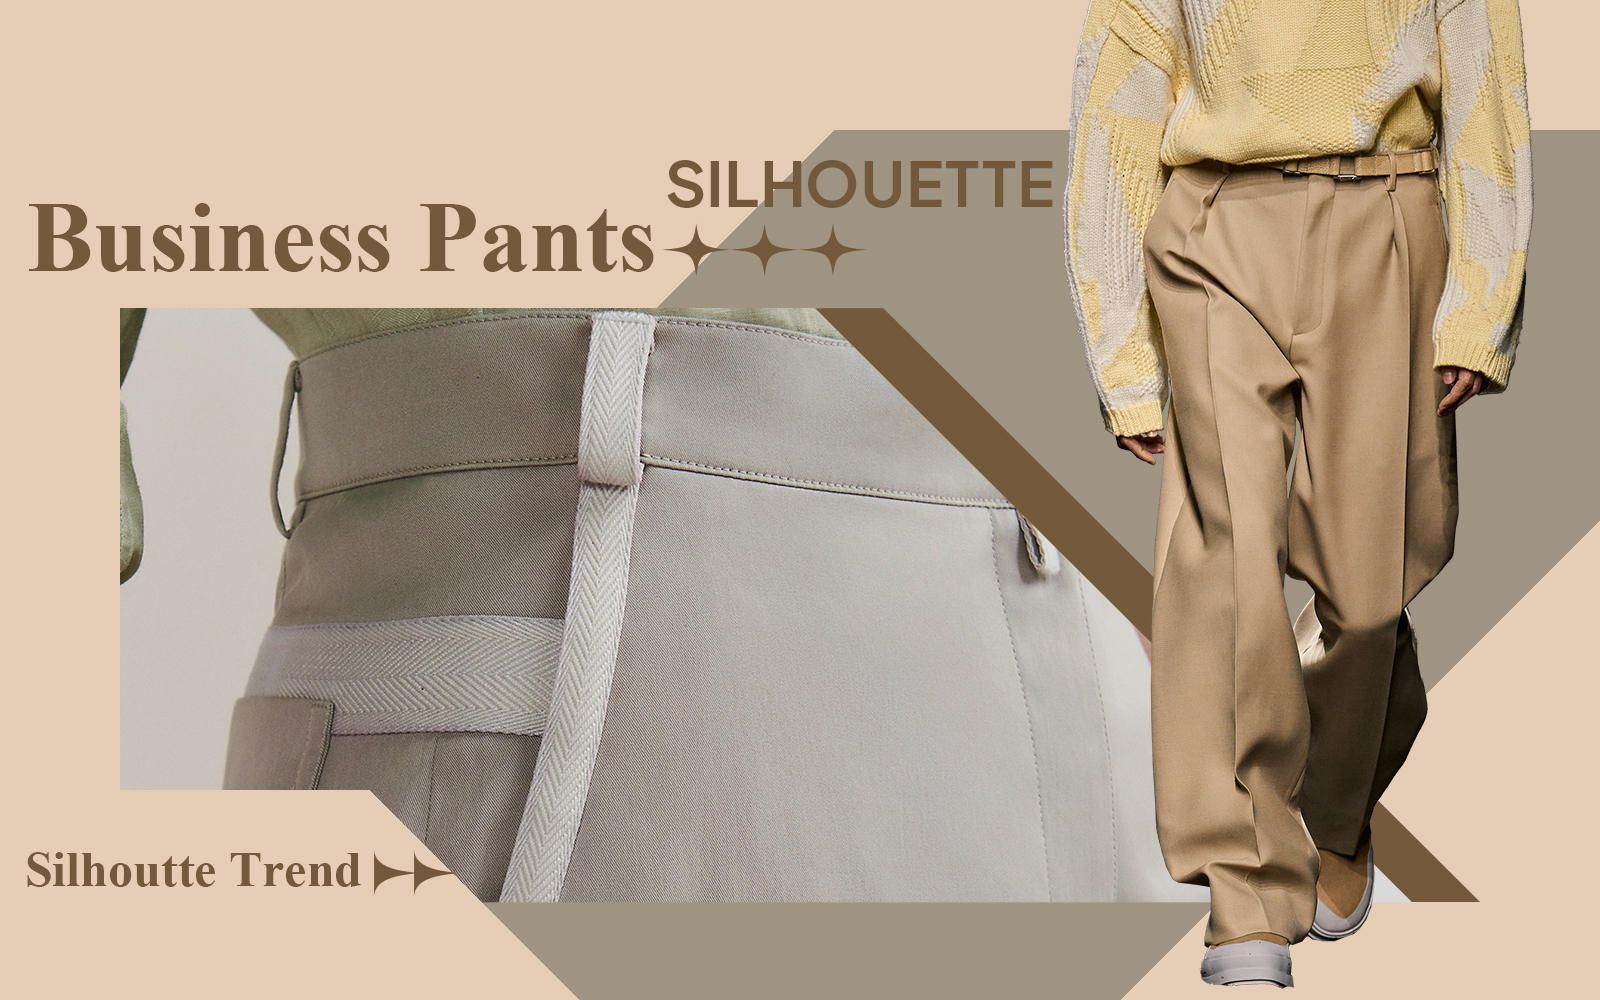 Reborn Classic -- The Silhouette Trend for Men's Business Pants